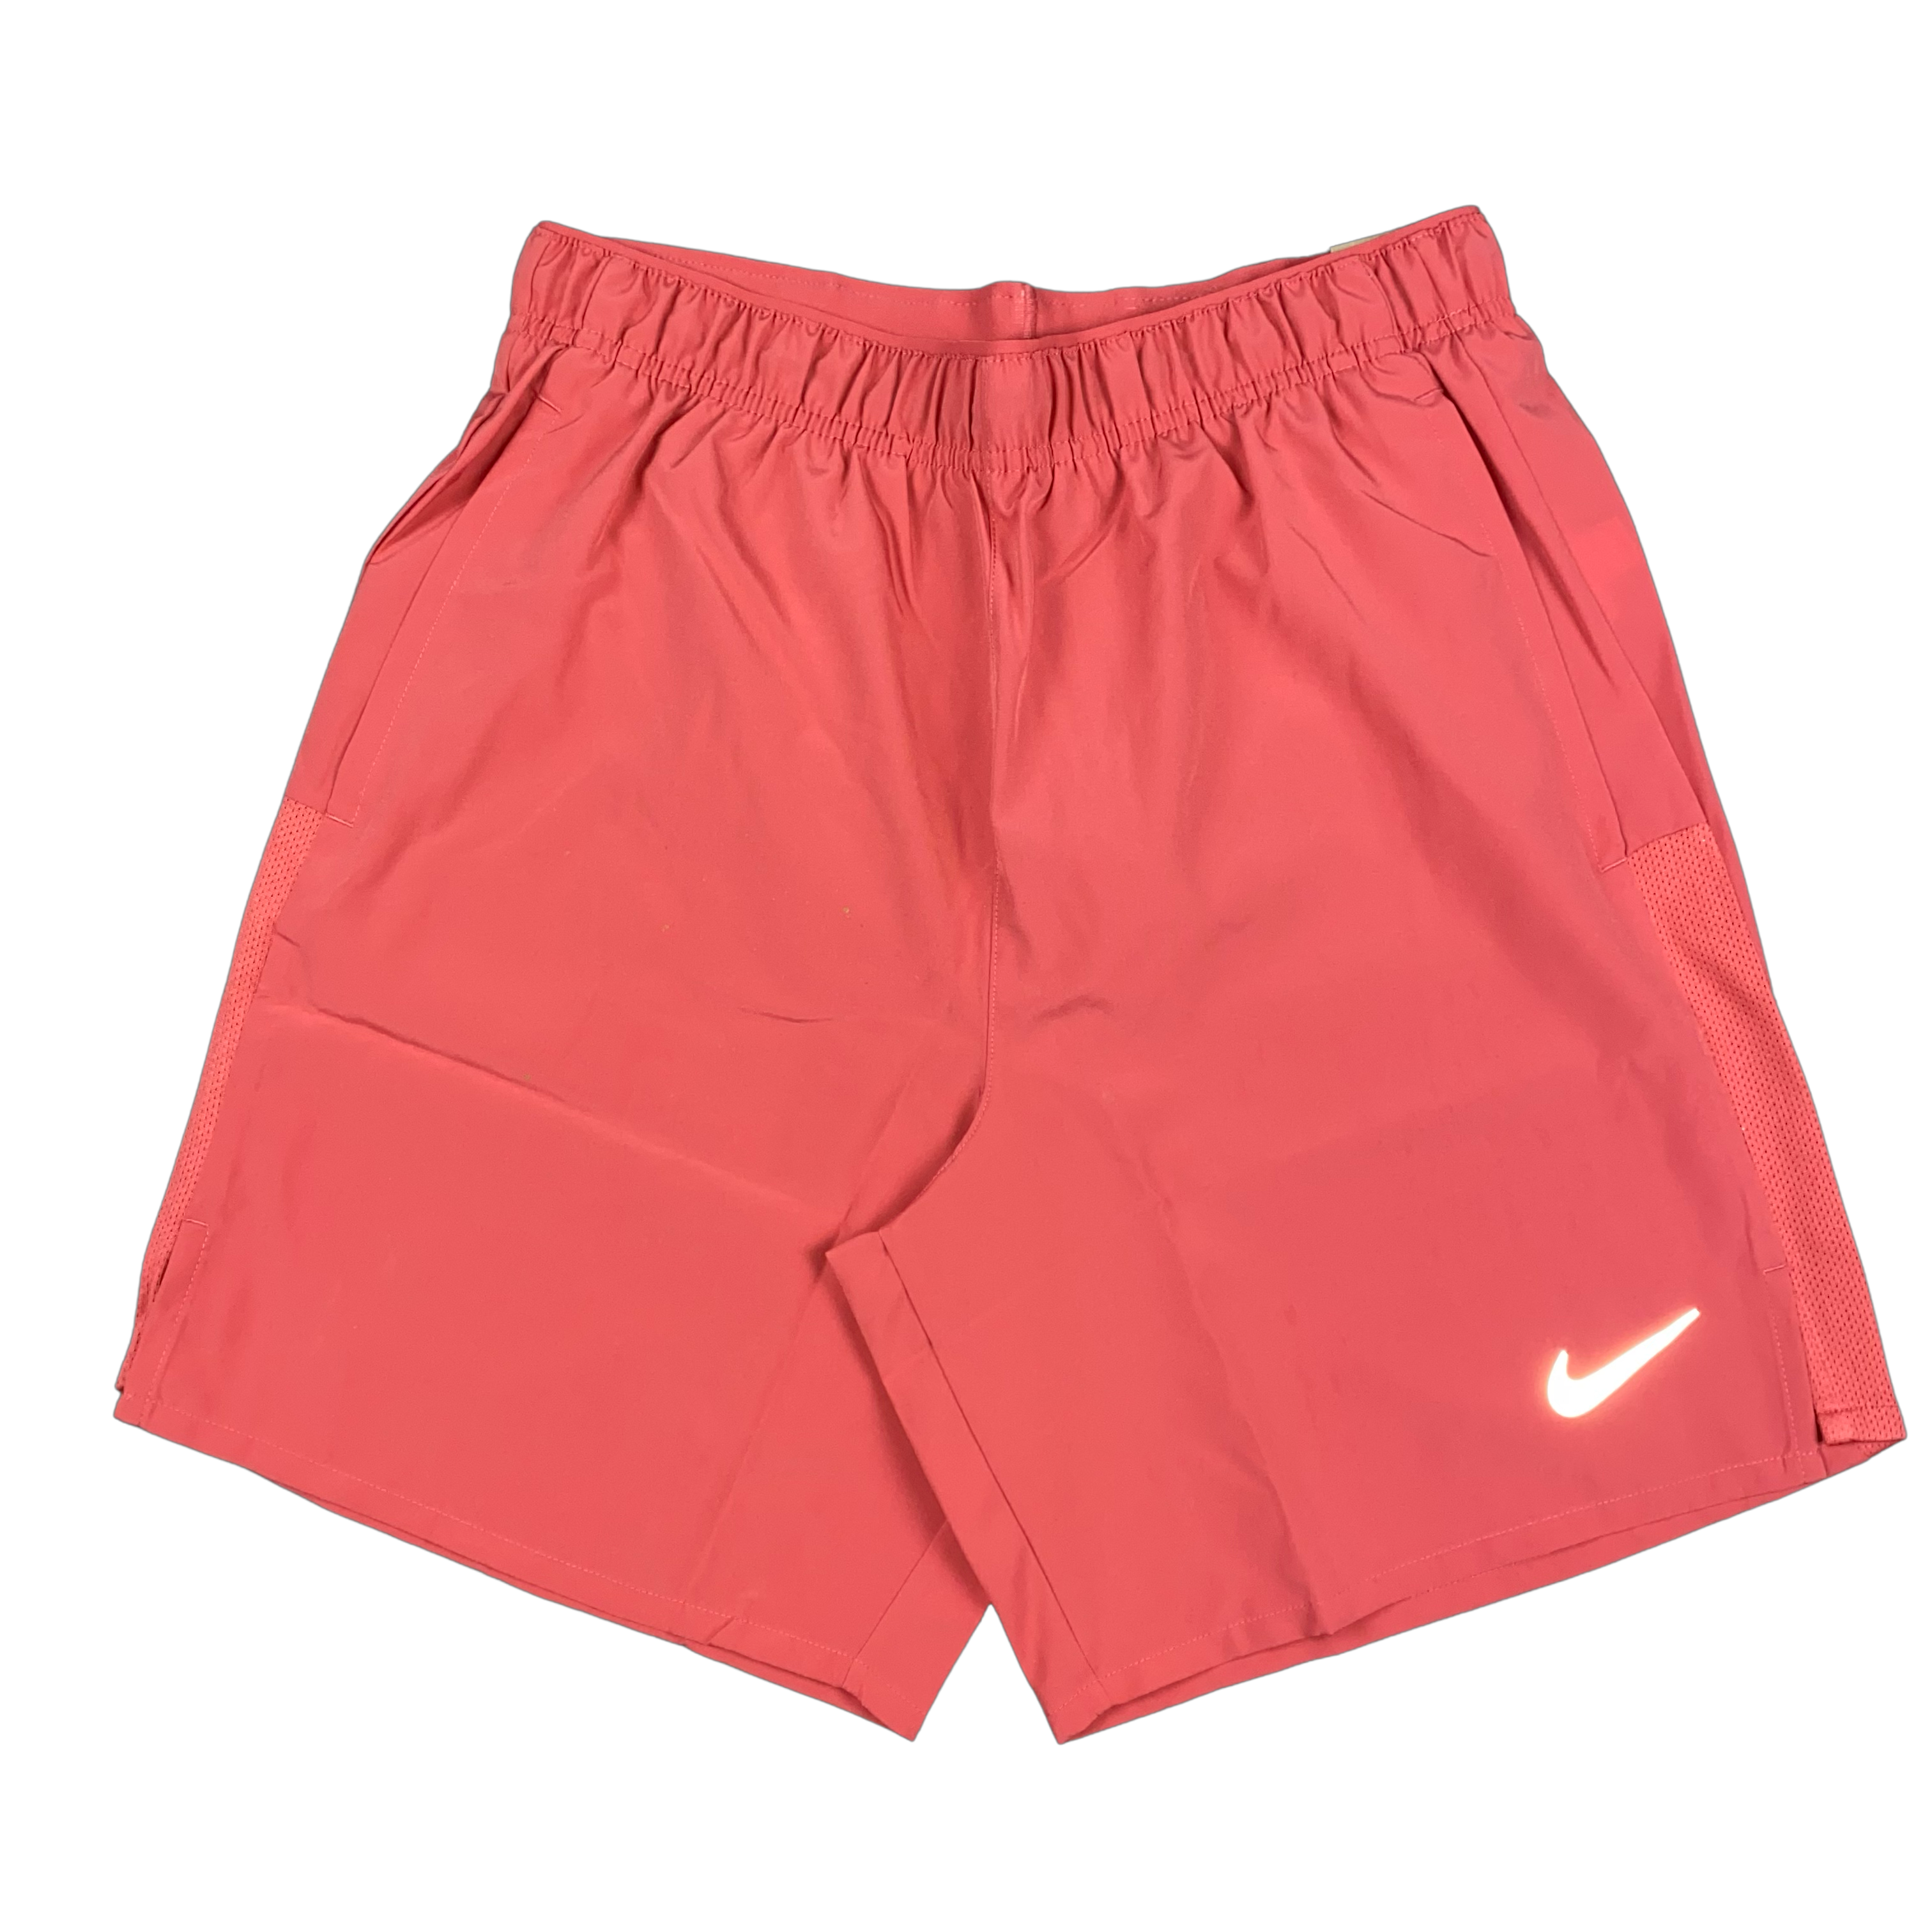 NIKE CHALLENGER SHORTS 7INCH - ADOBE RED